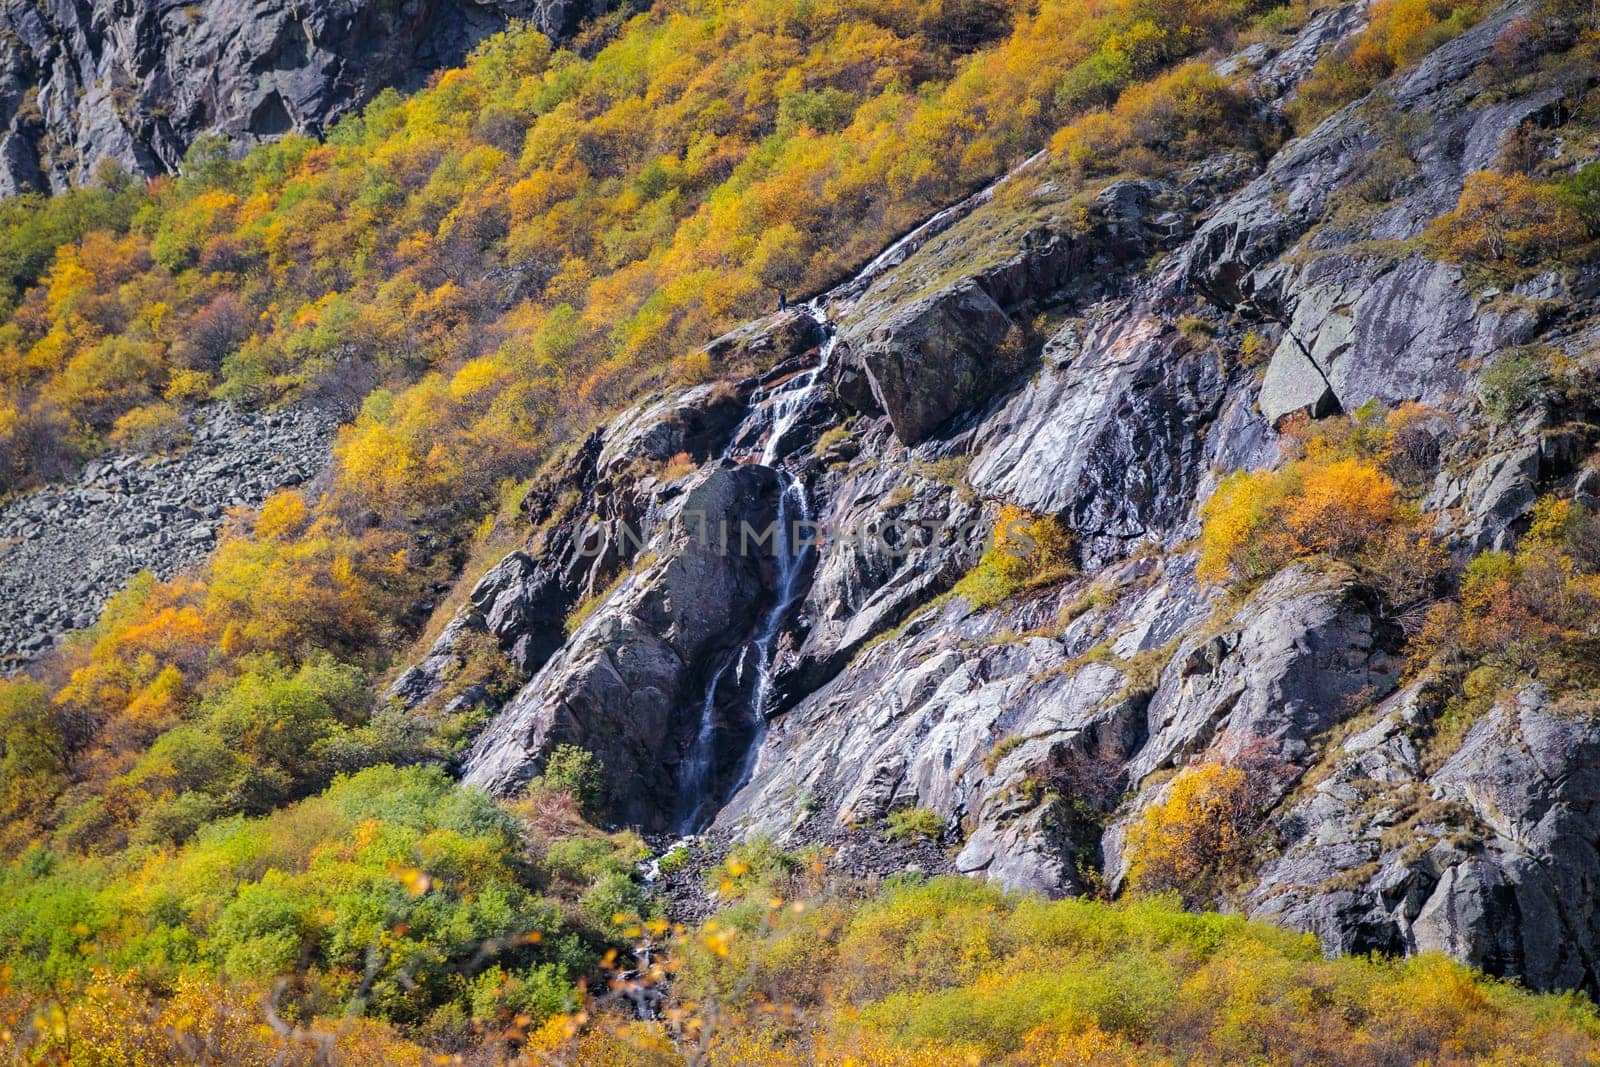 The picturesque autumn colors of the Ural Mountains create an amazing landscape